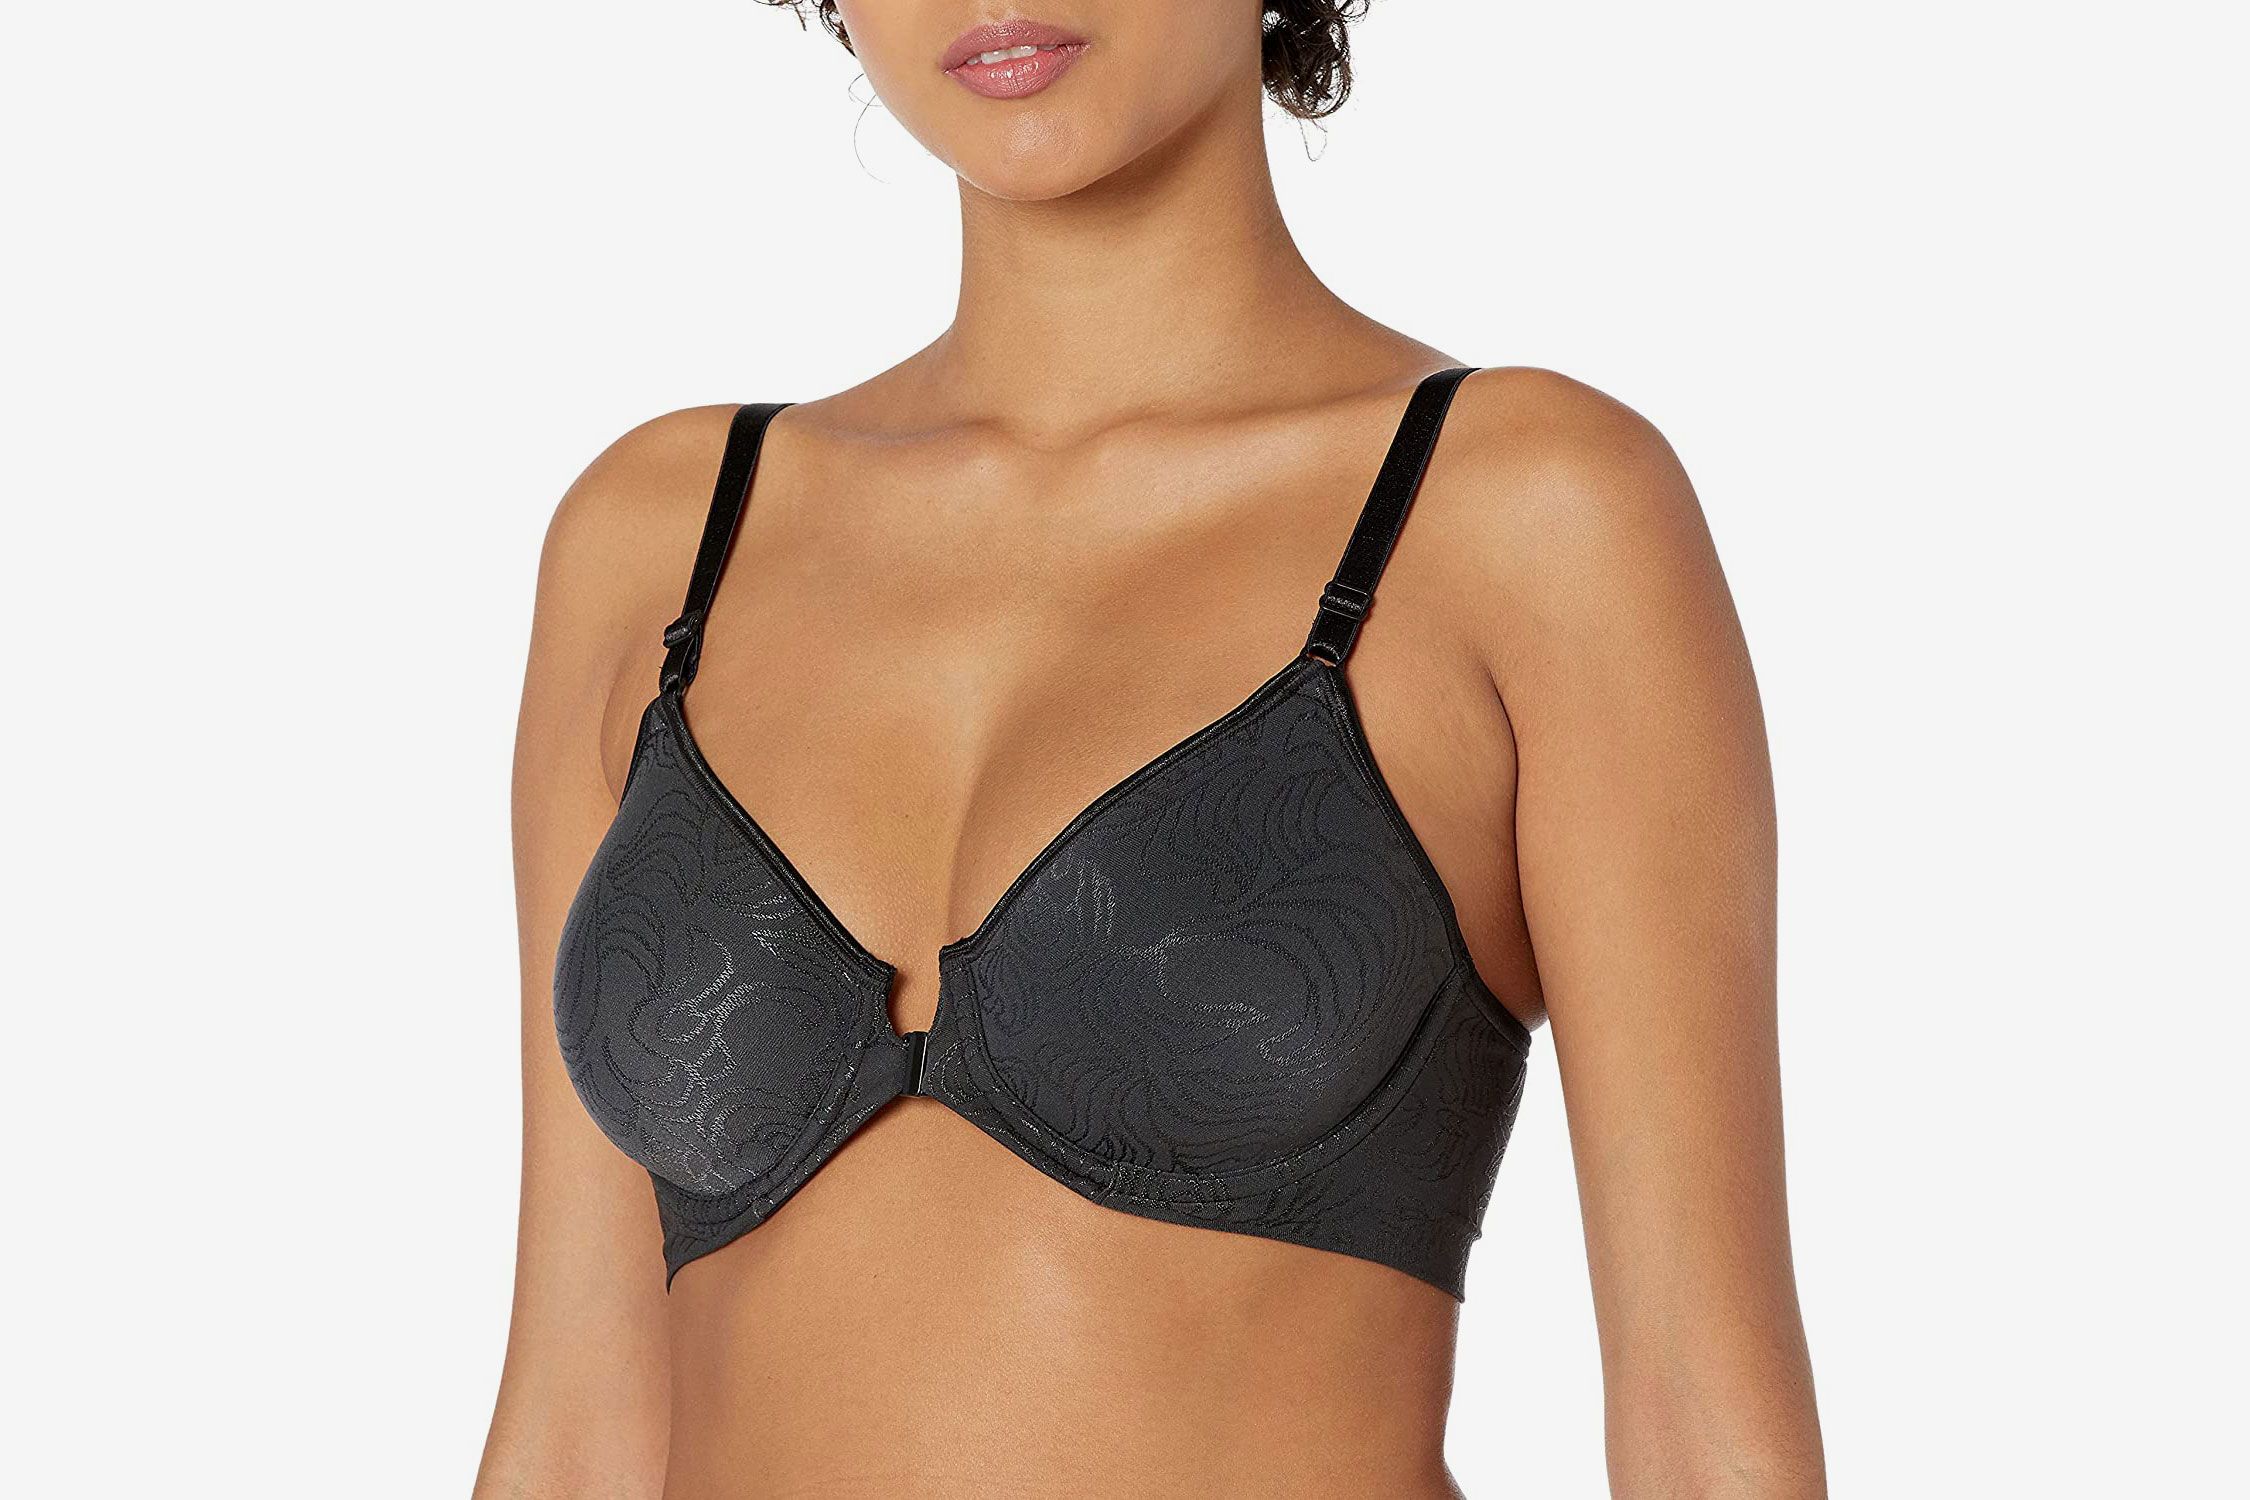 Riza Minimizer Bra - Enhance Your Confidence with Perfect Fit